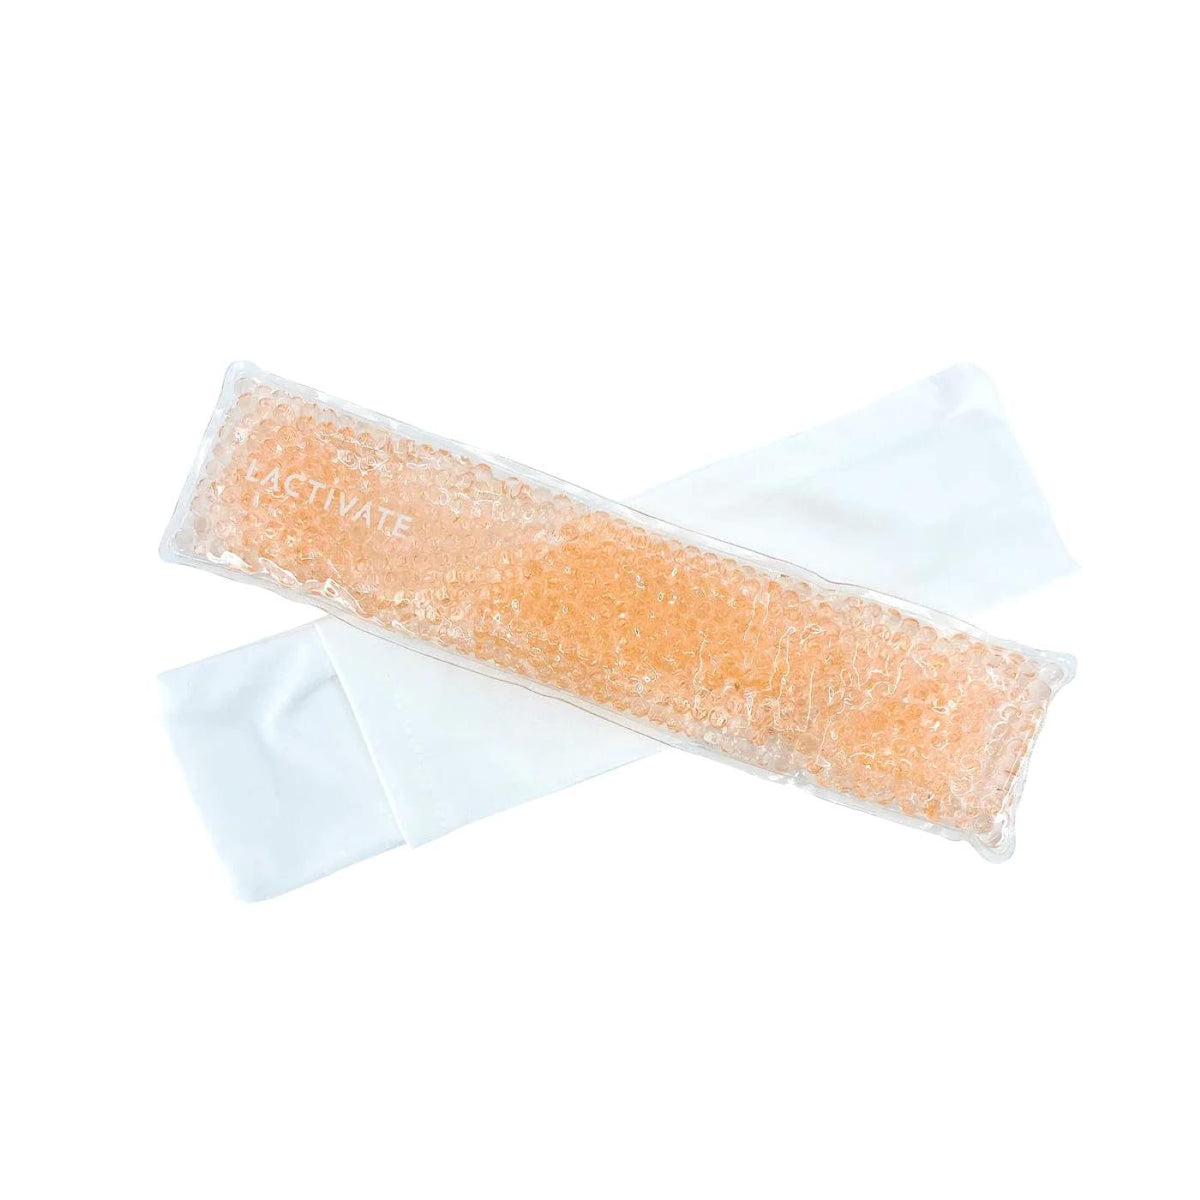 Lactivate Pereneal Ice Packs